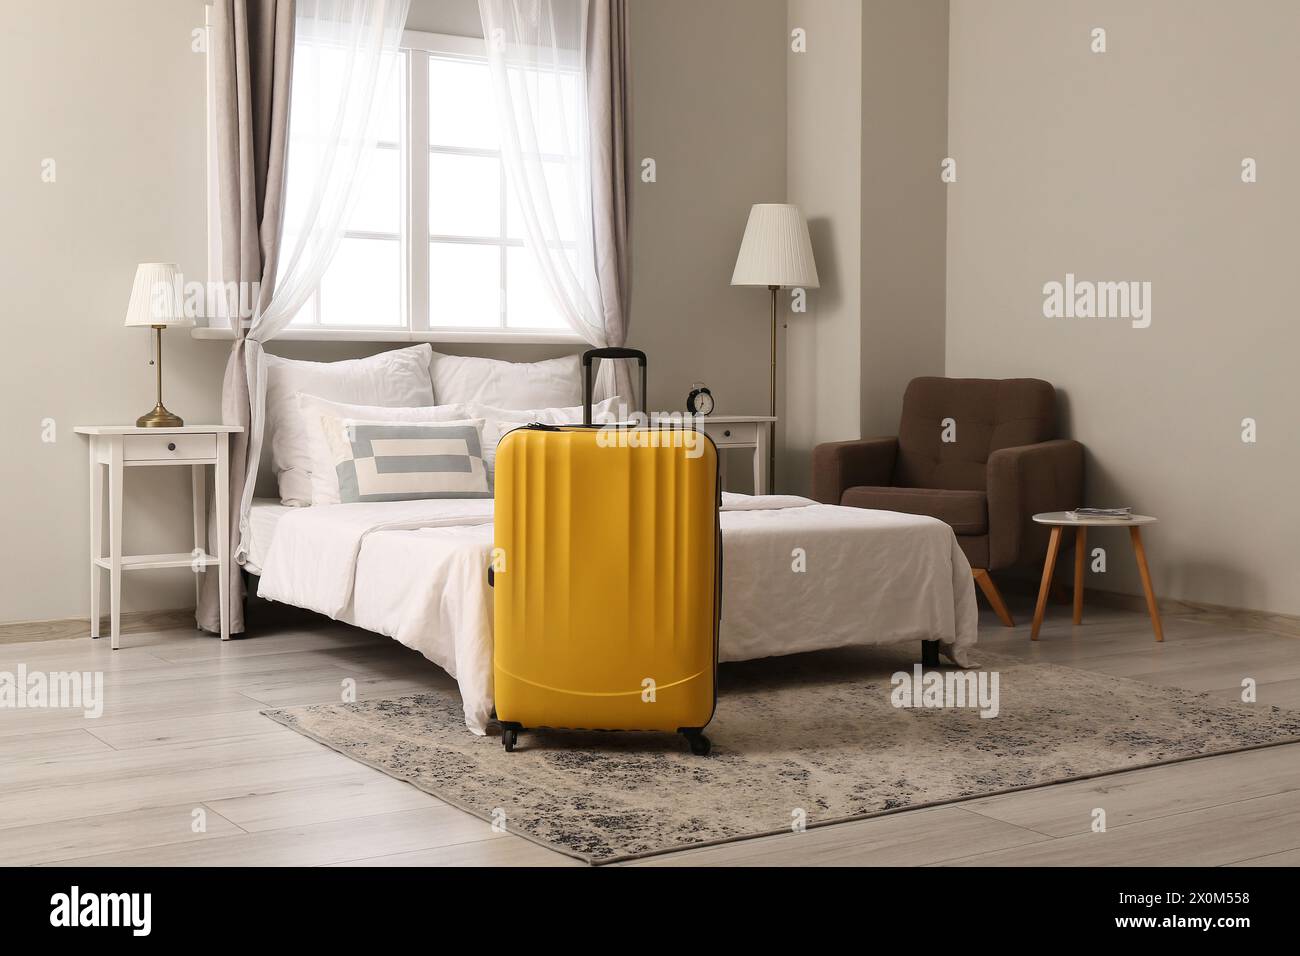 Interior of hotel room with suitcase near bed Stock Photo